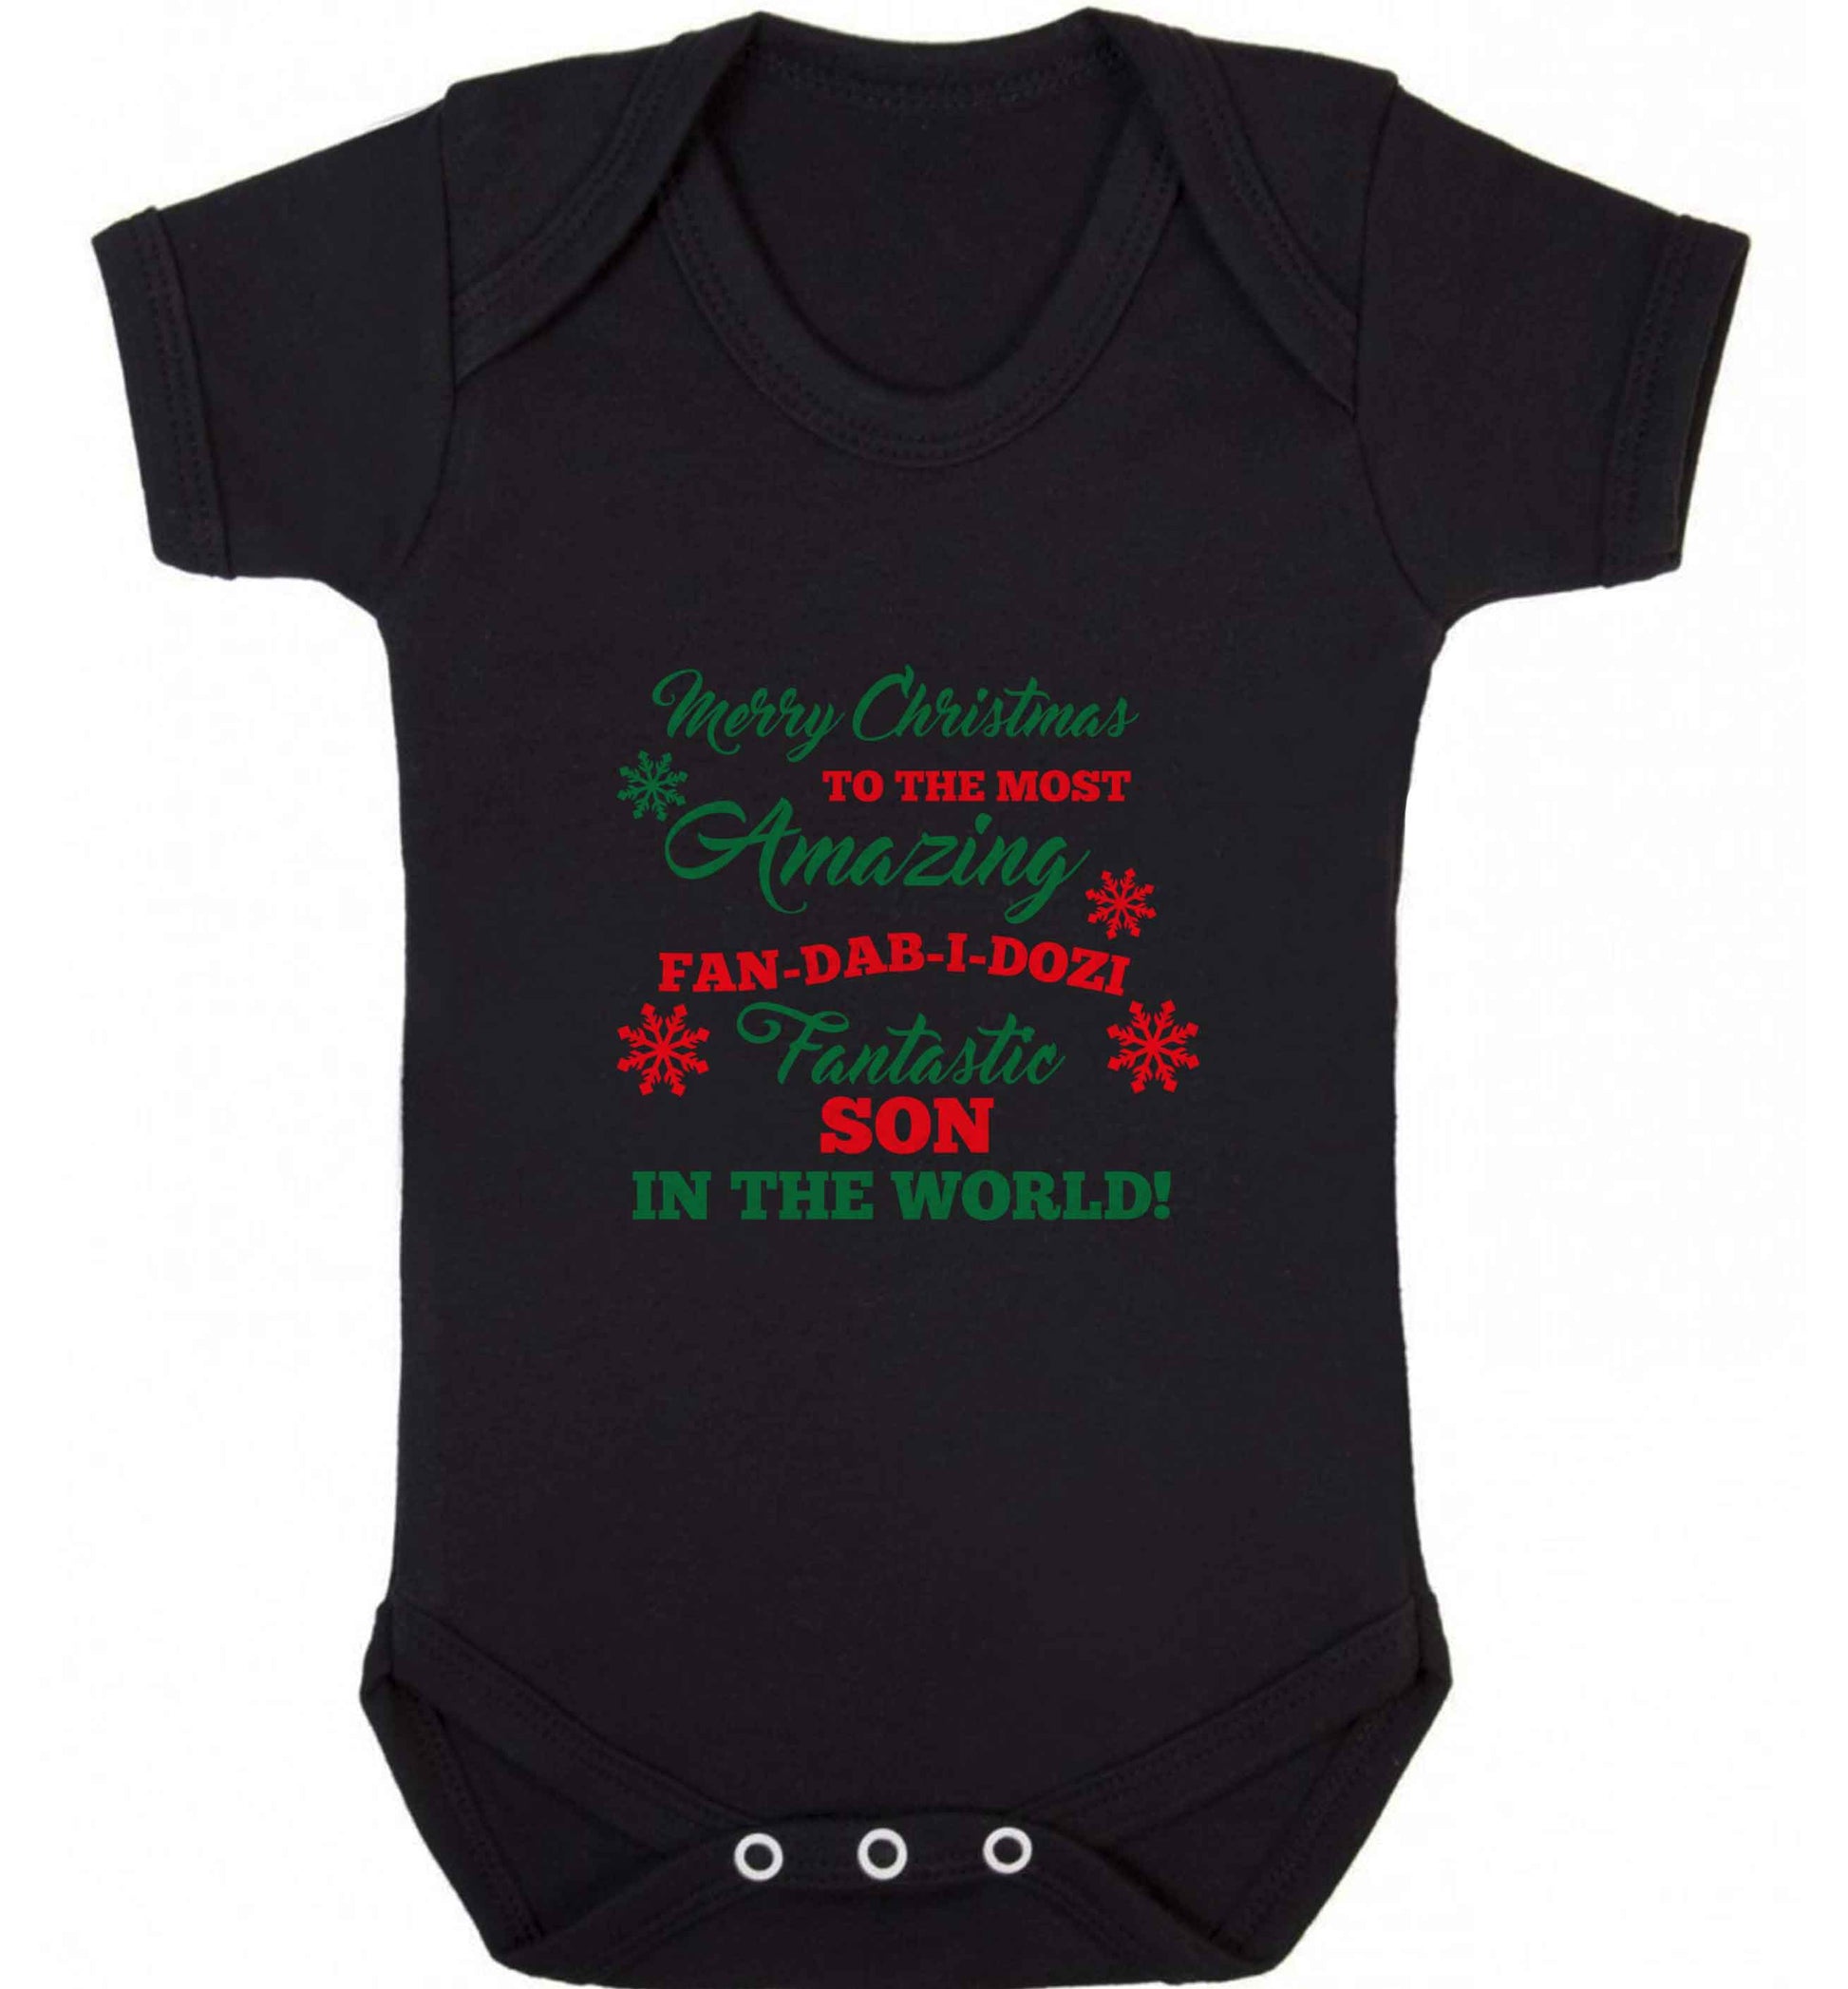 Merry Christmas to the most amazing fan-dab-i-dozi fantasic Son in the world baby vest black 18-24 months